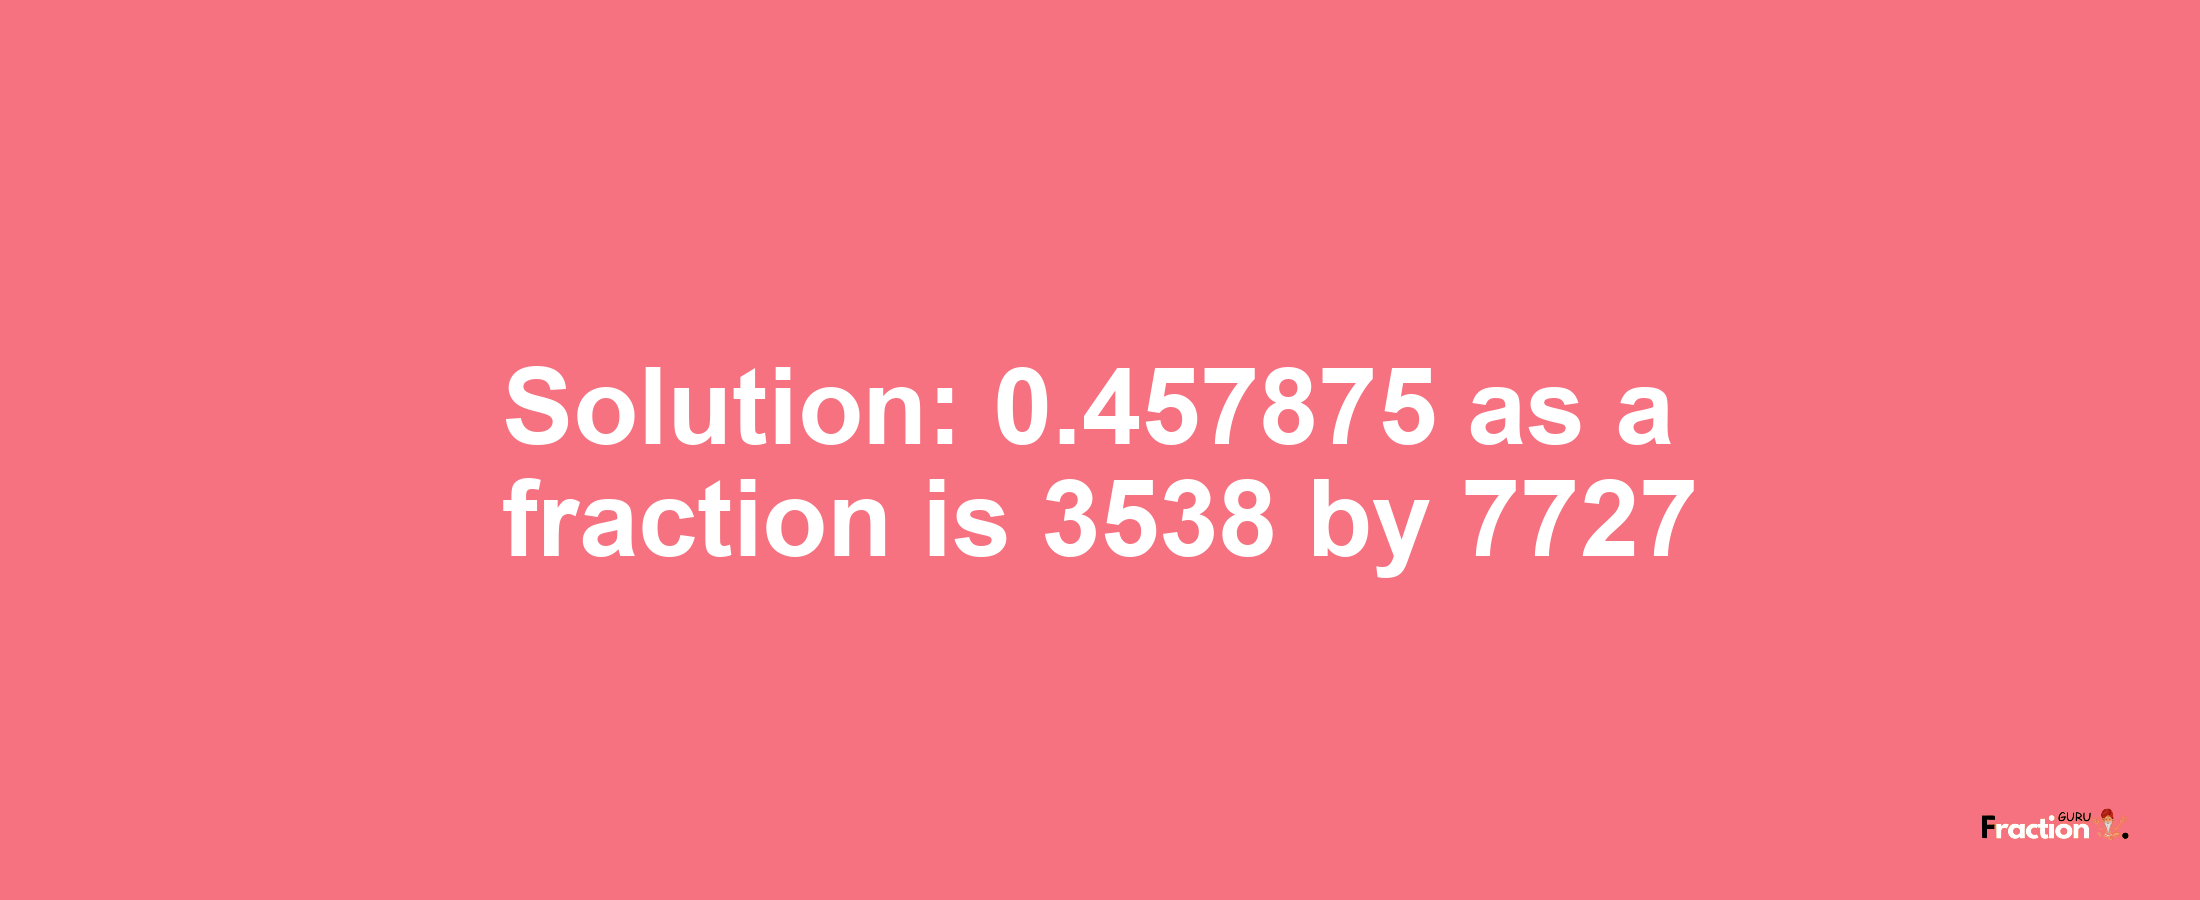 Solution:0.457875 as a fraction is 3538/7727